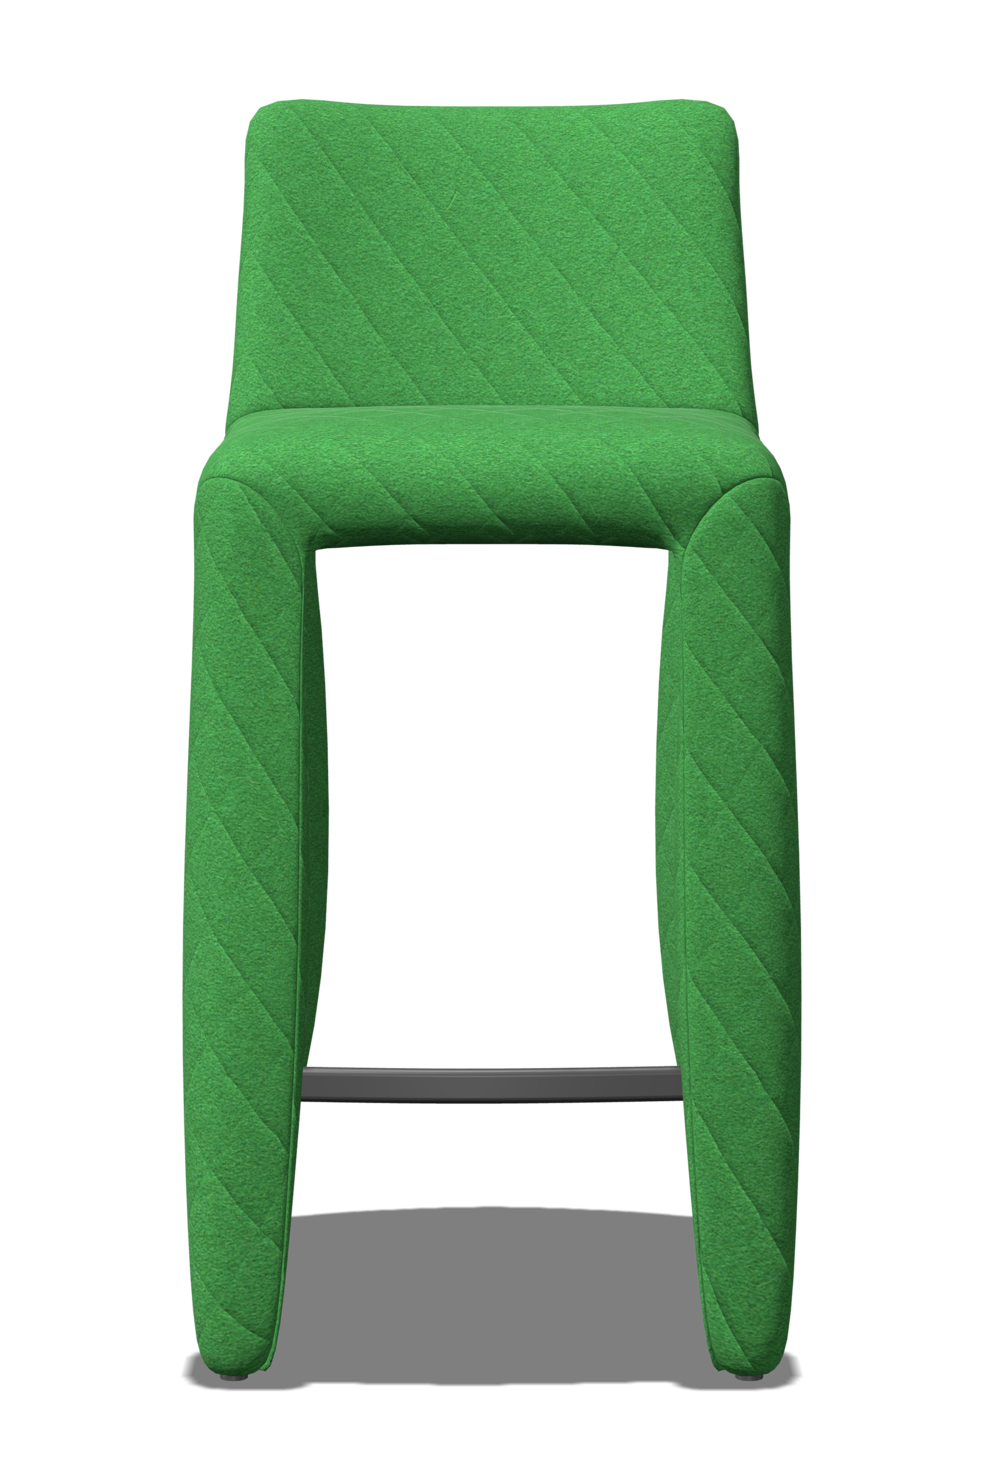 Monster Barstool low stitching green